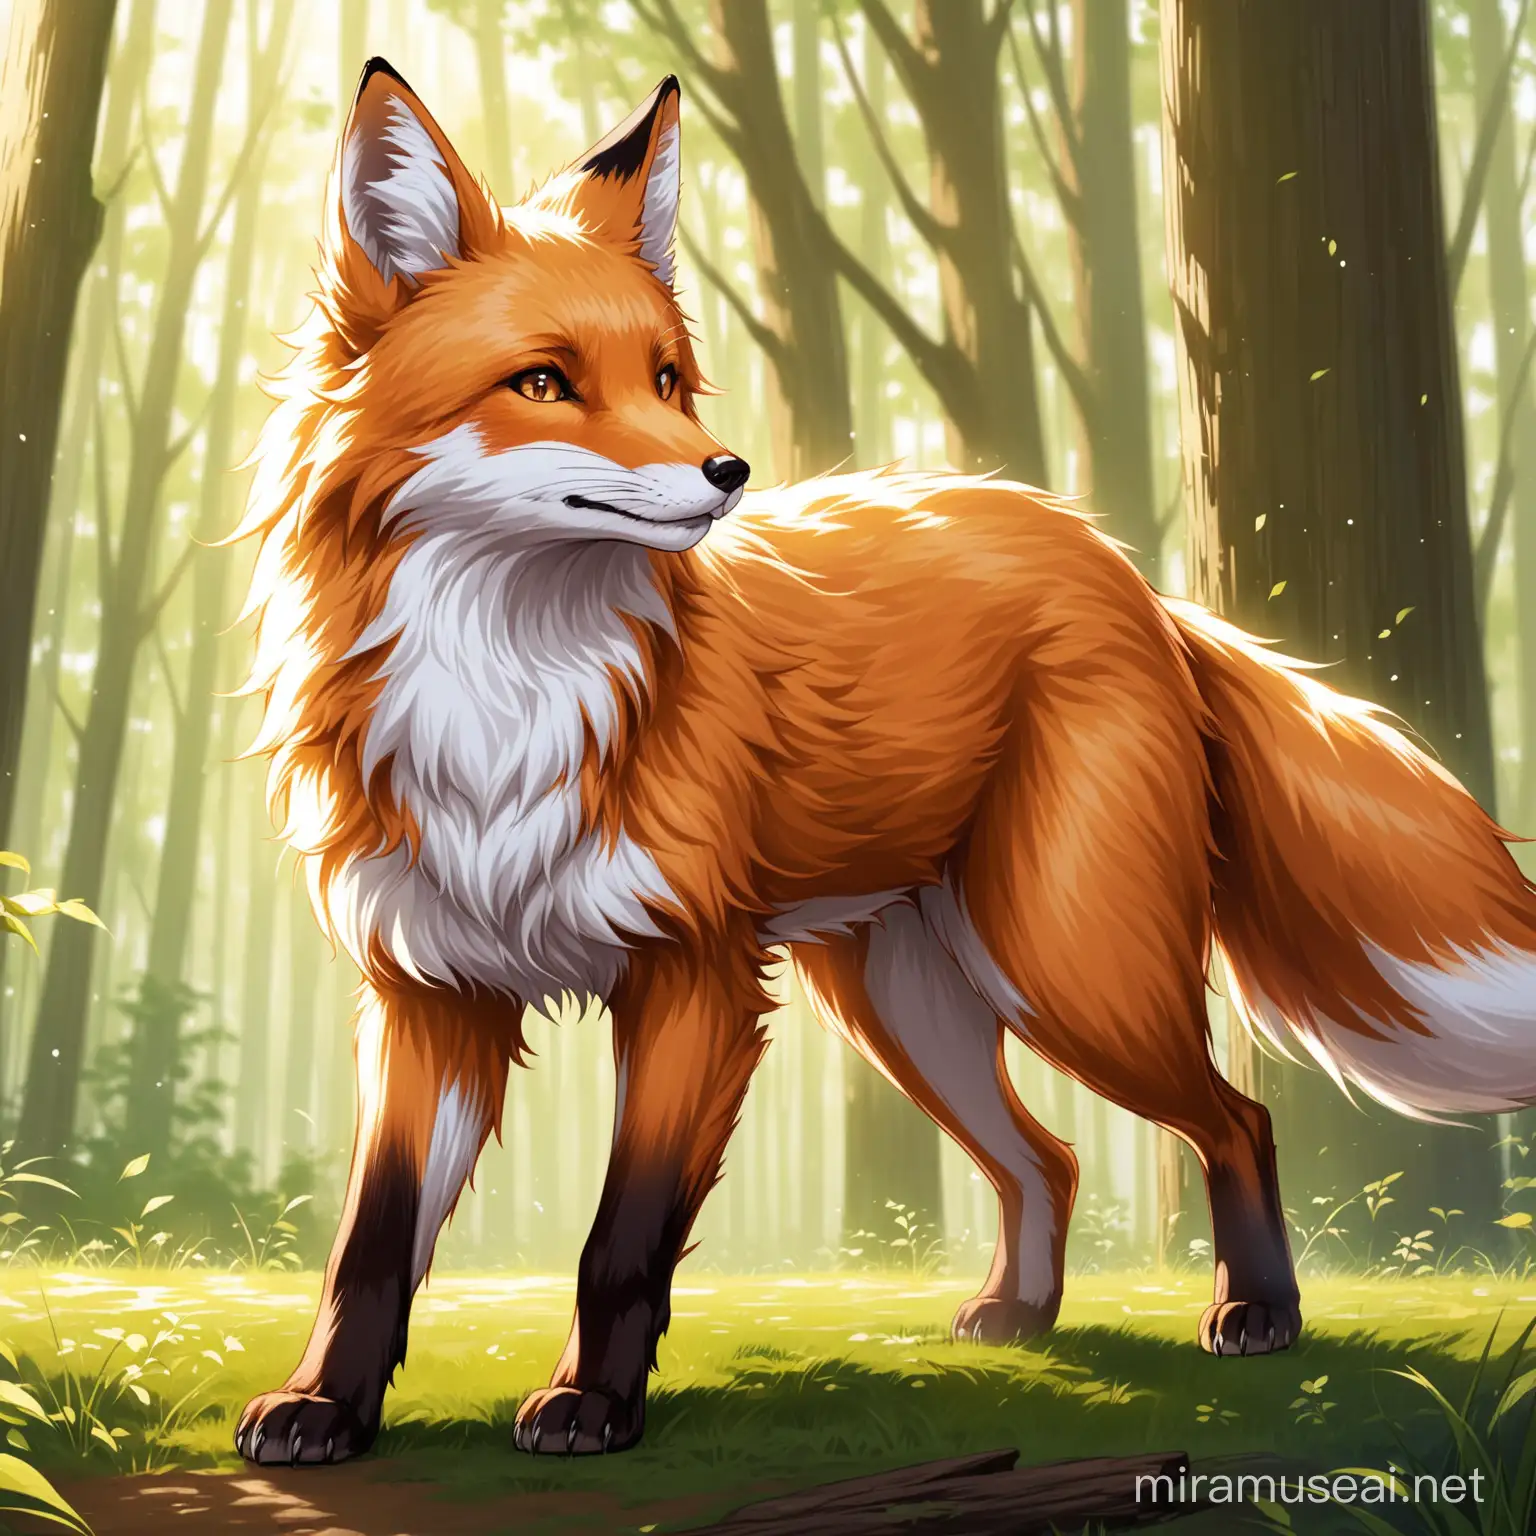 Majestic Adult Fox with Russet and Silver Fur